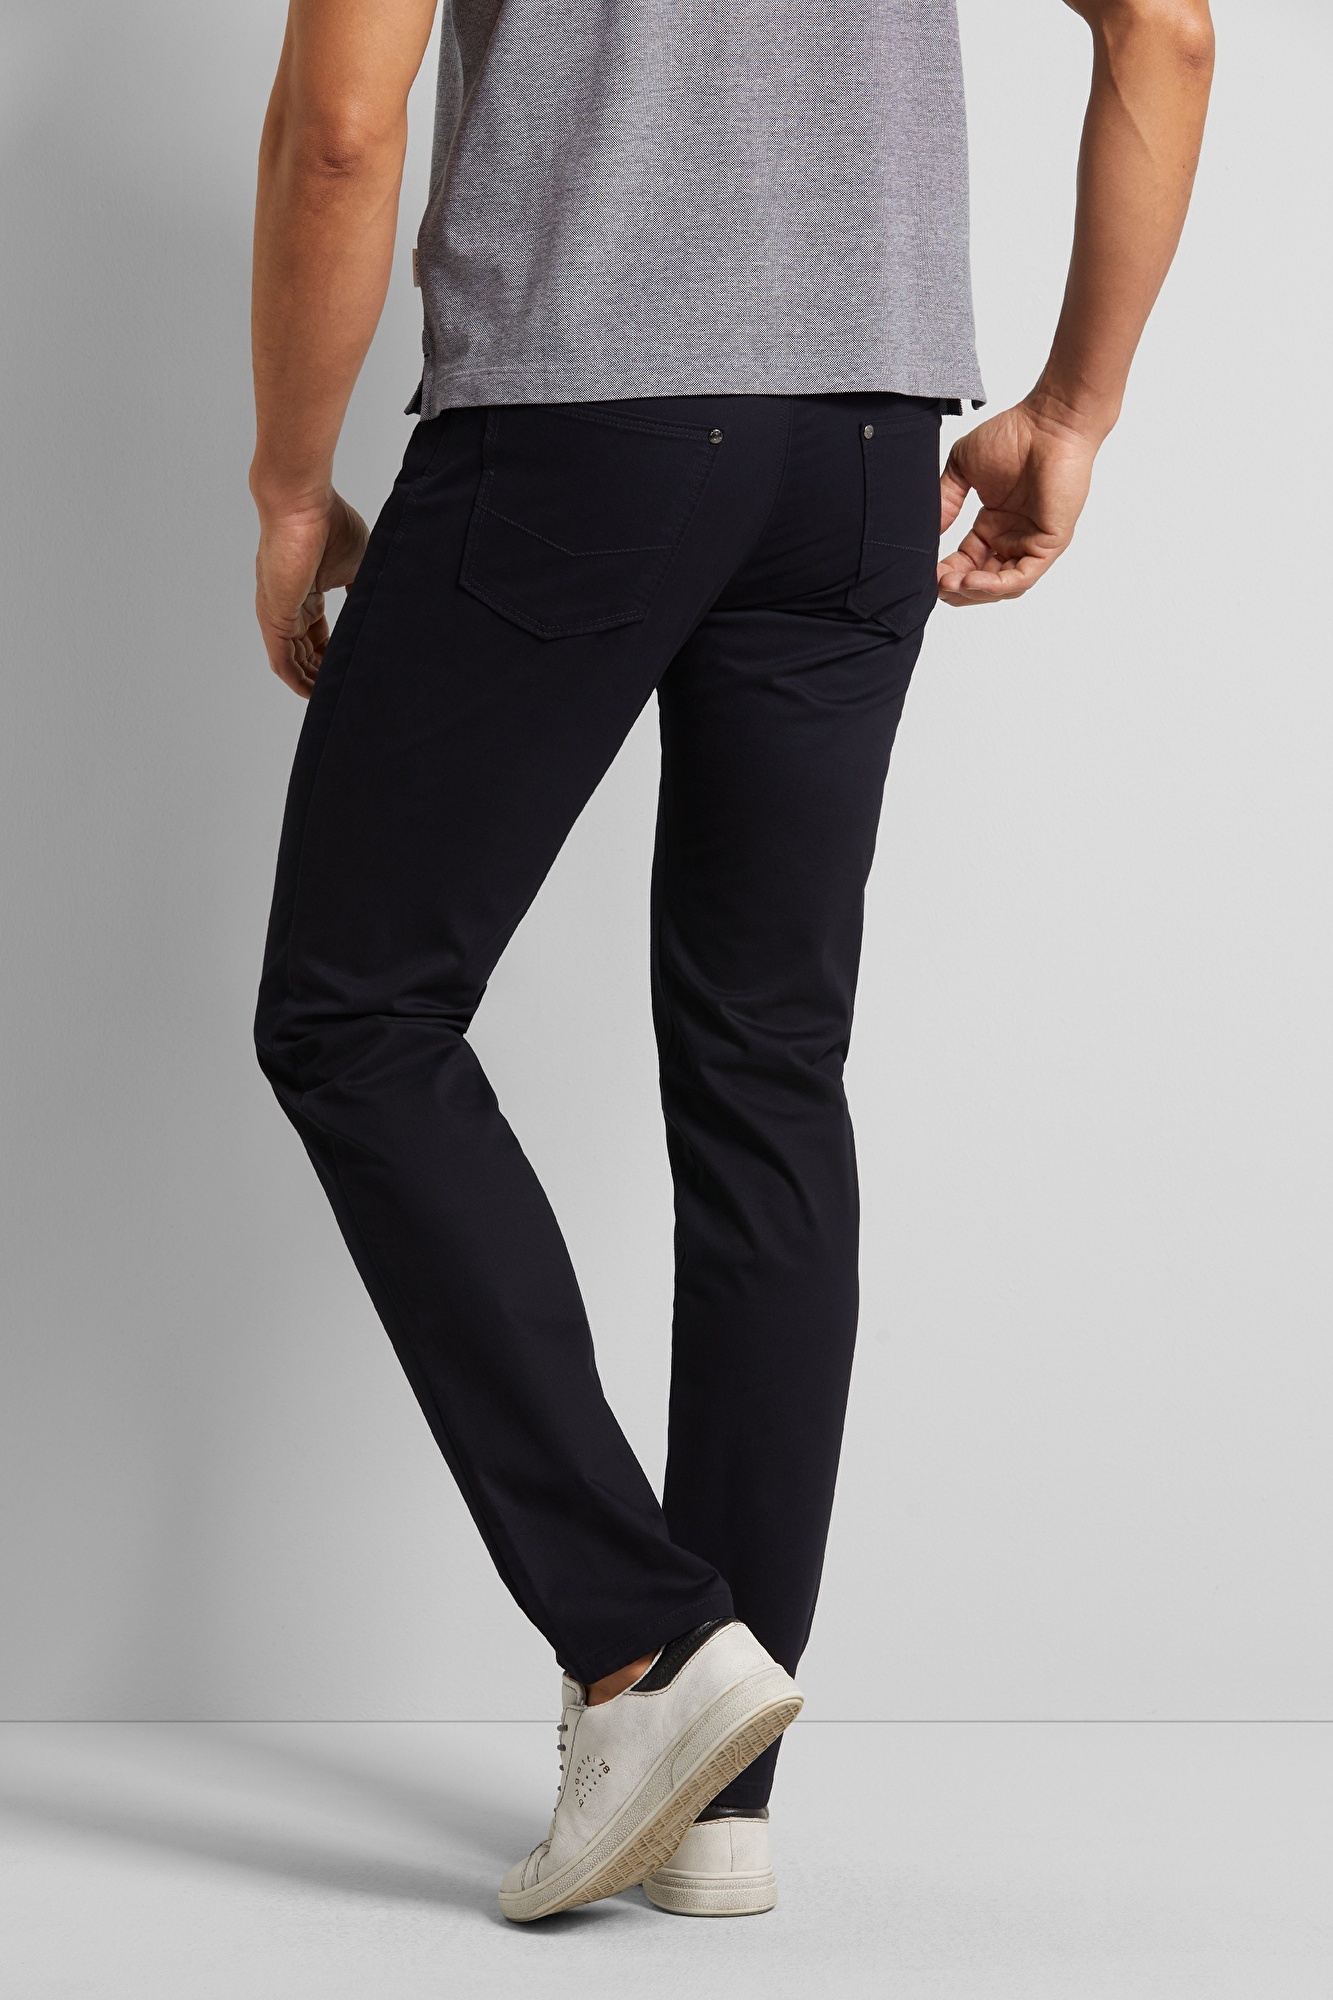 five-pocket with Constant Colour stretch in navy | bugatti